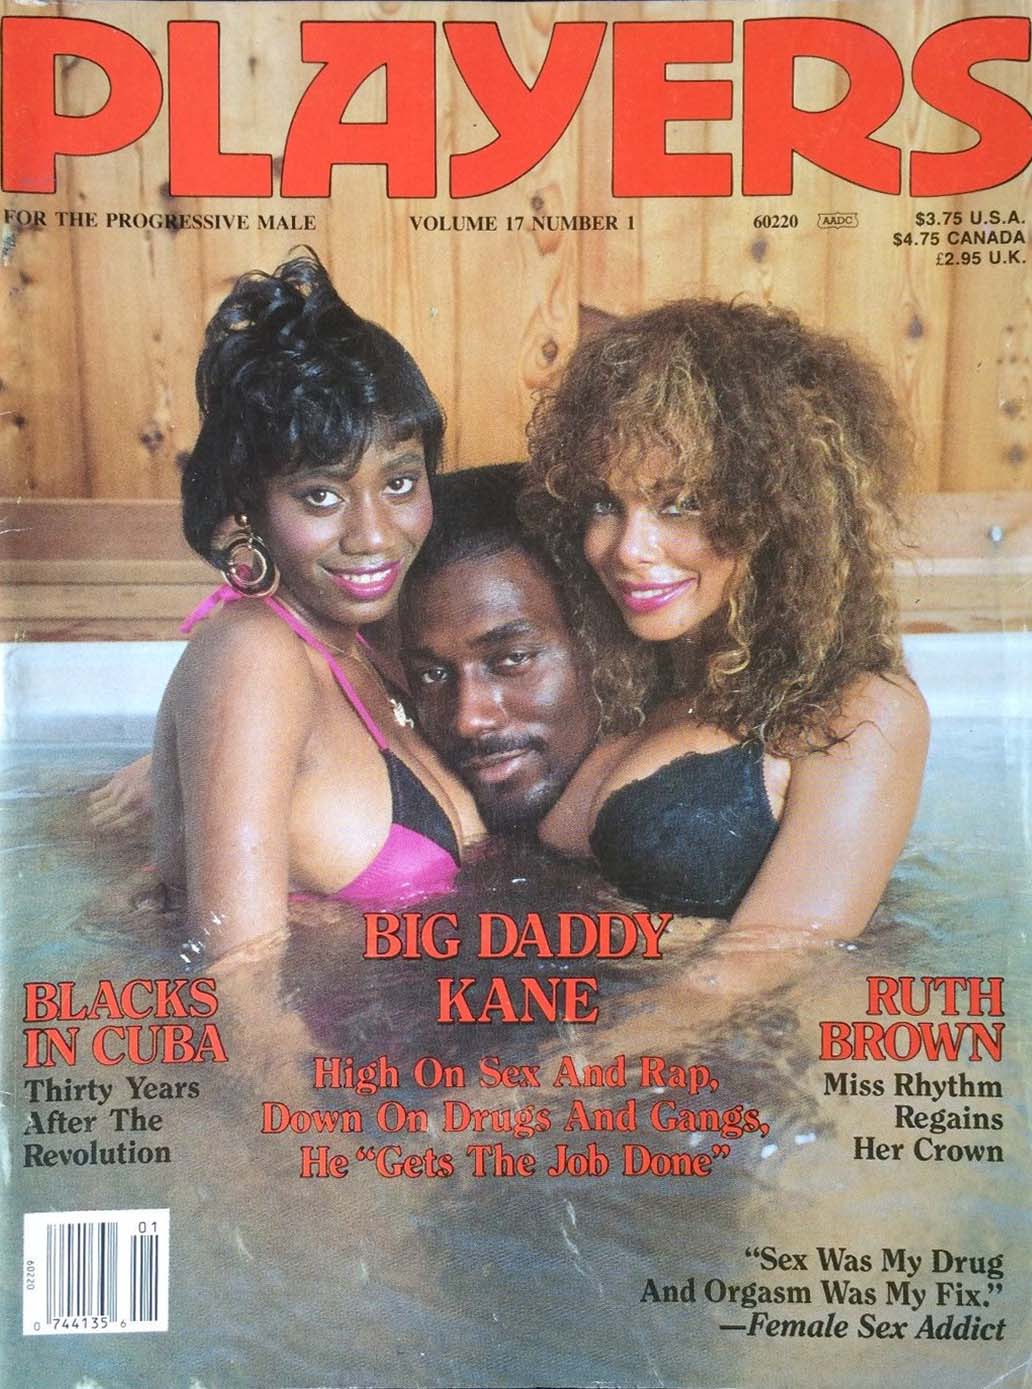 Players Vol. 17 # 1 magazine back issue Players magizine back copy Players Vol. 17 # 1 Adult Black Playboy Mens Magazine Back Issue Featuring Naked Black Women Published by Players. Blacks In Cuba Thirty Years After The Revolution.